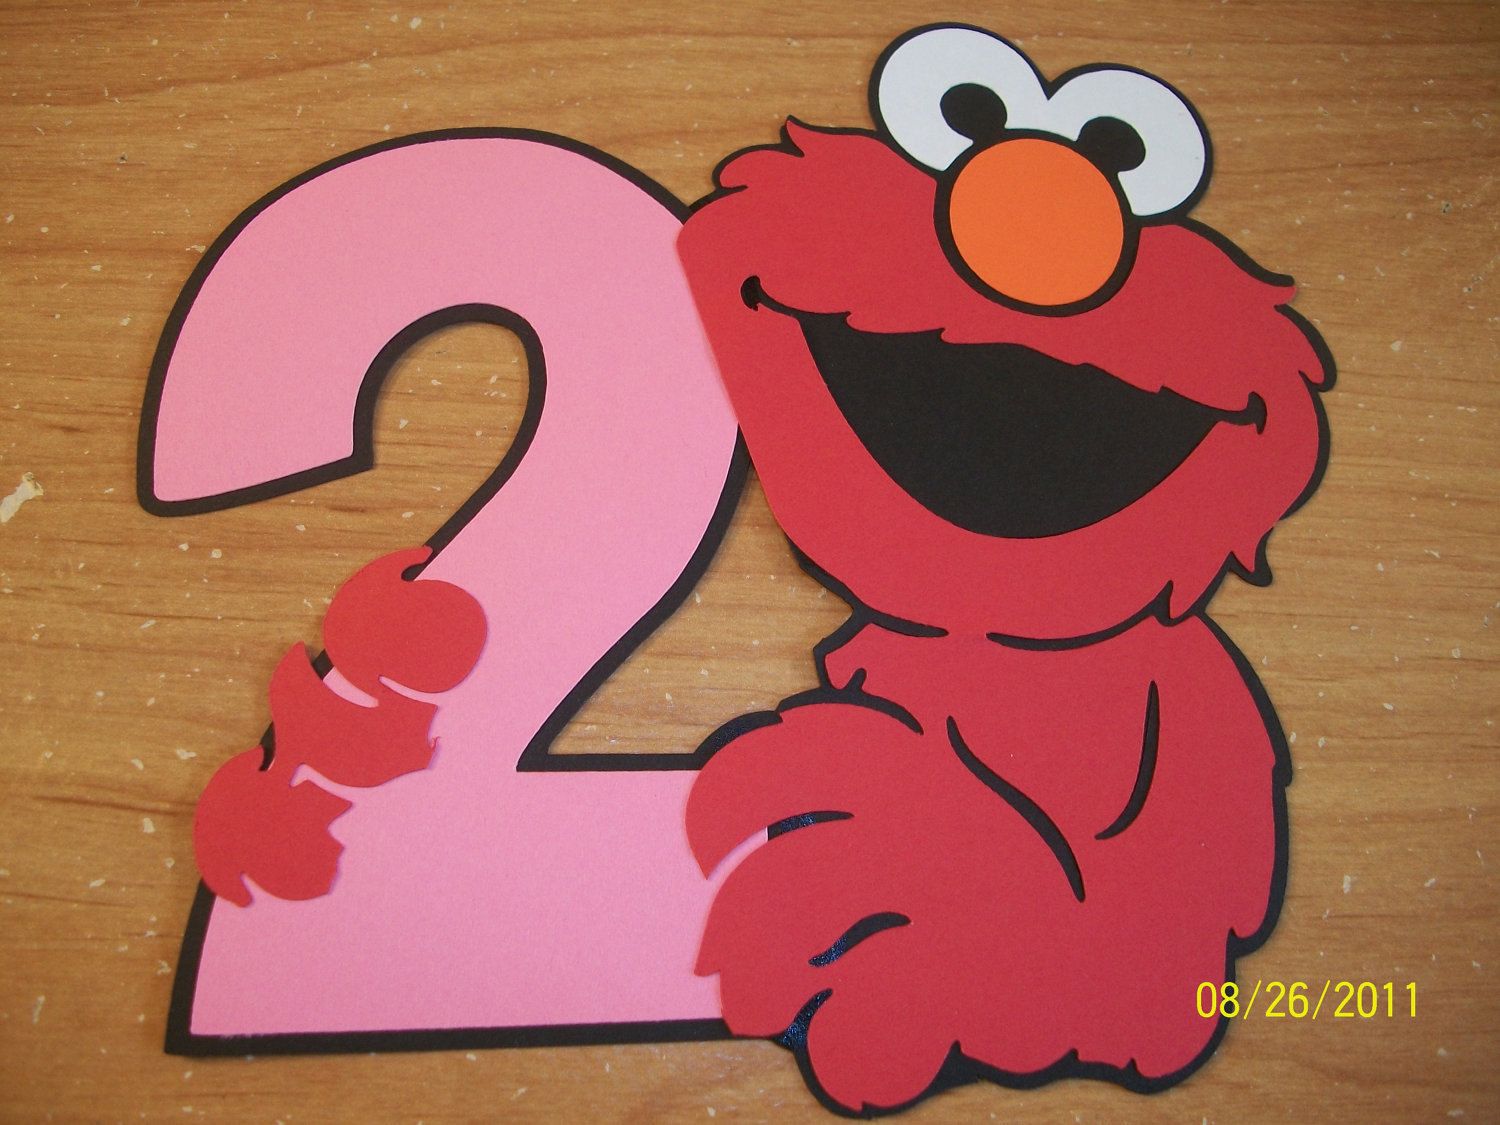 Elmo holding a number